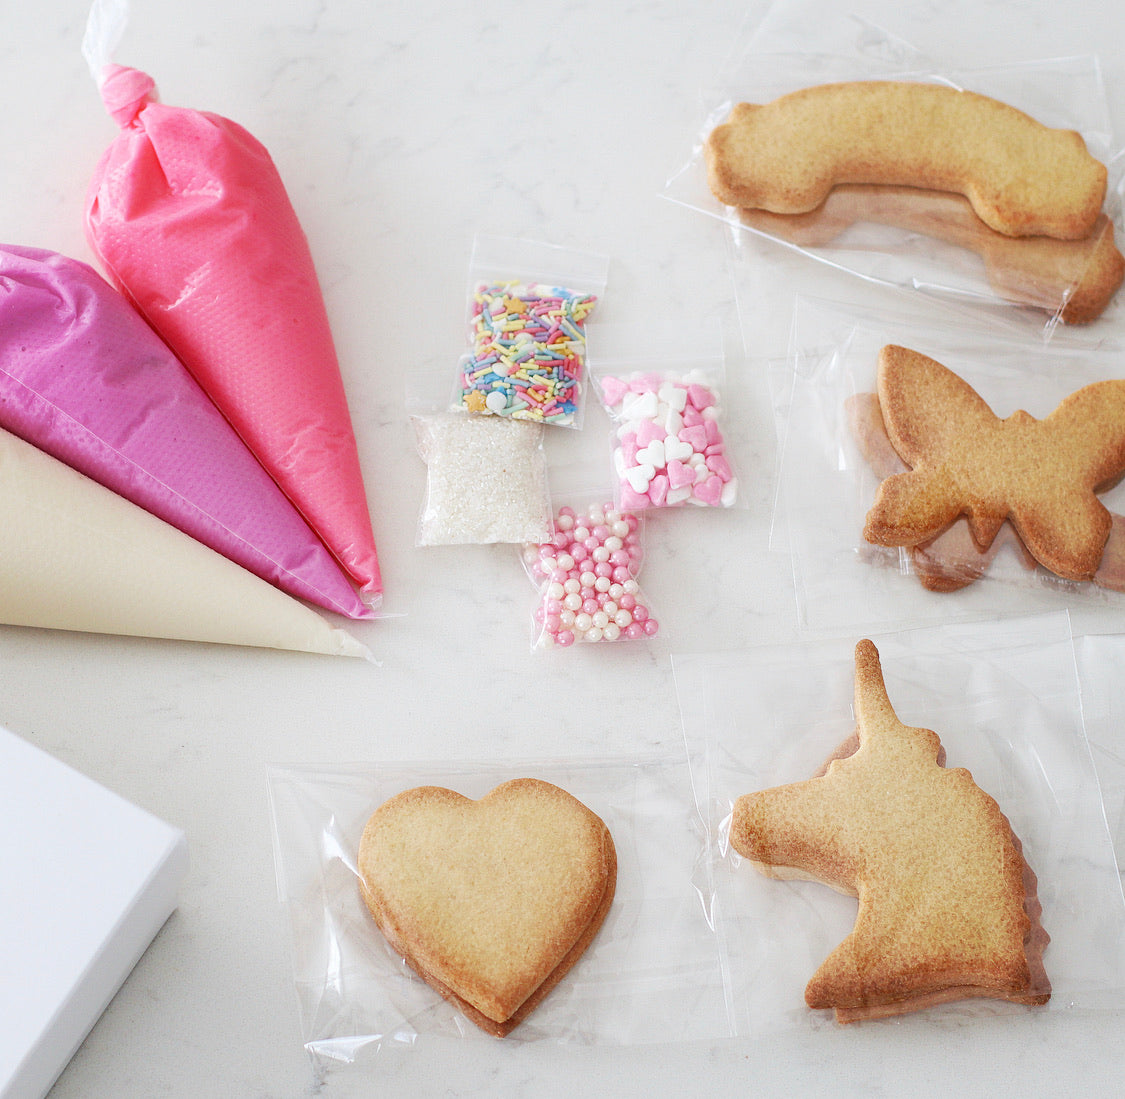 Unicorn & Rainbows DIY Cookie Kit - Contains 3 Piping bags, filled with ready to use icing in Pink, Purple & White.  4 Bags of sprinkles/decorations  8 Cookies, ready to decorate. Cookie shapes include: Rainbow, Butterfly, Unicorn & Heart.